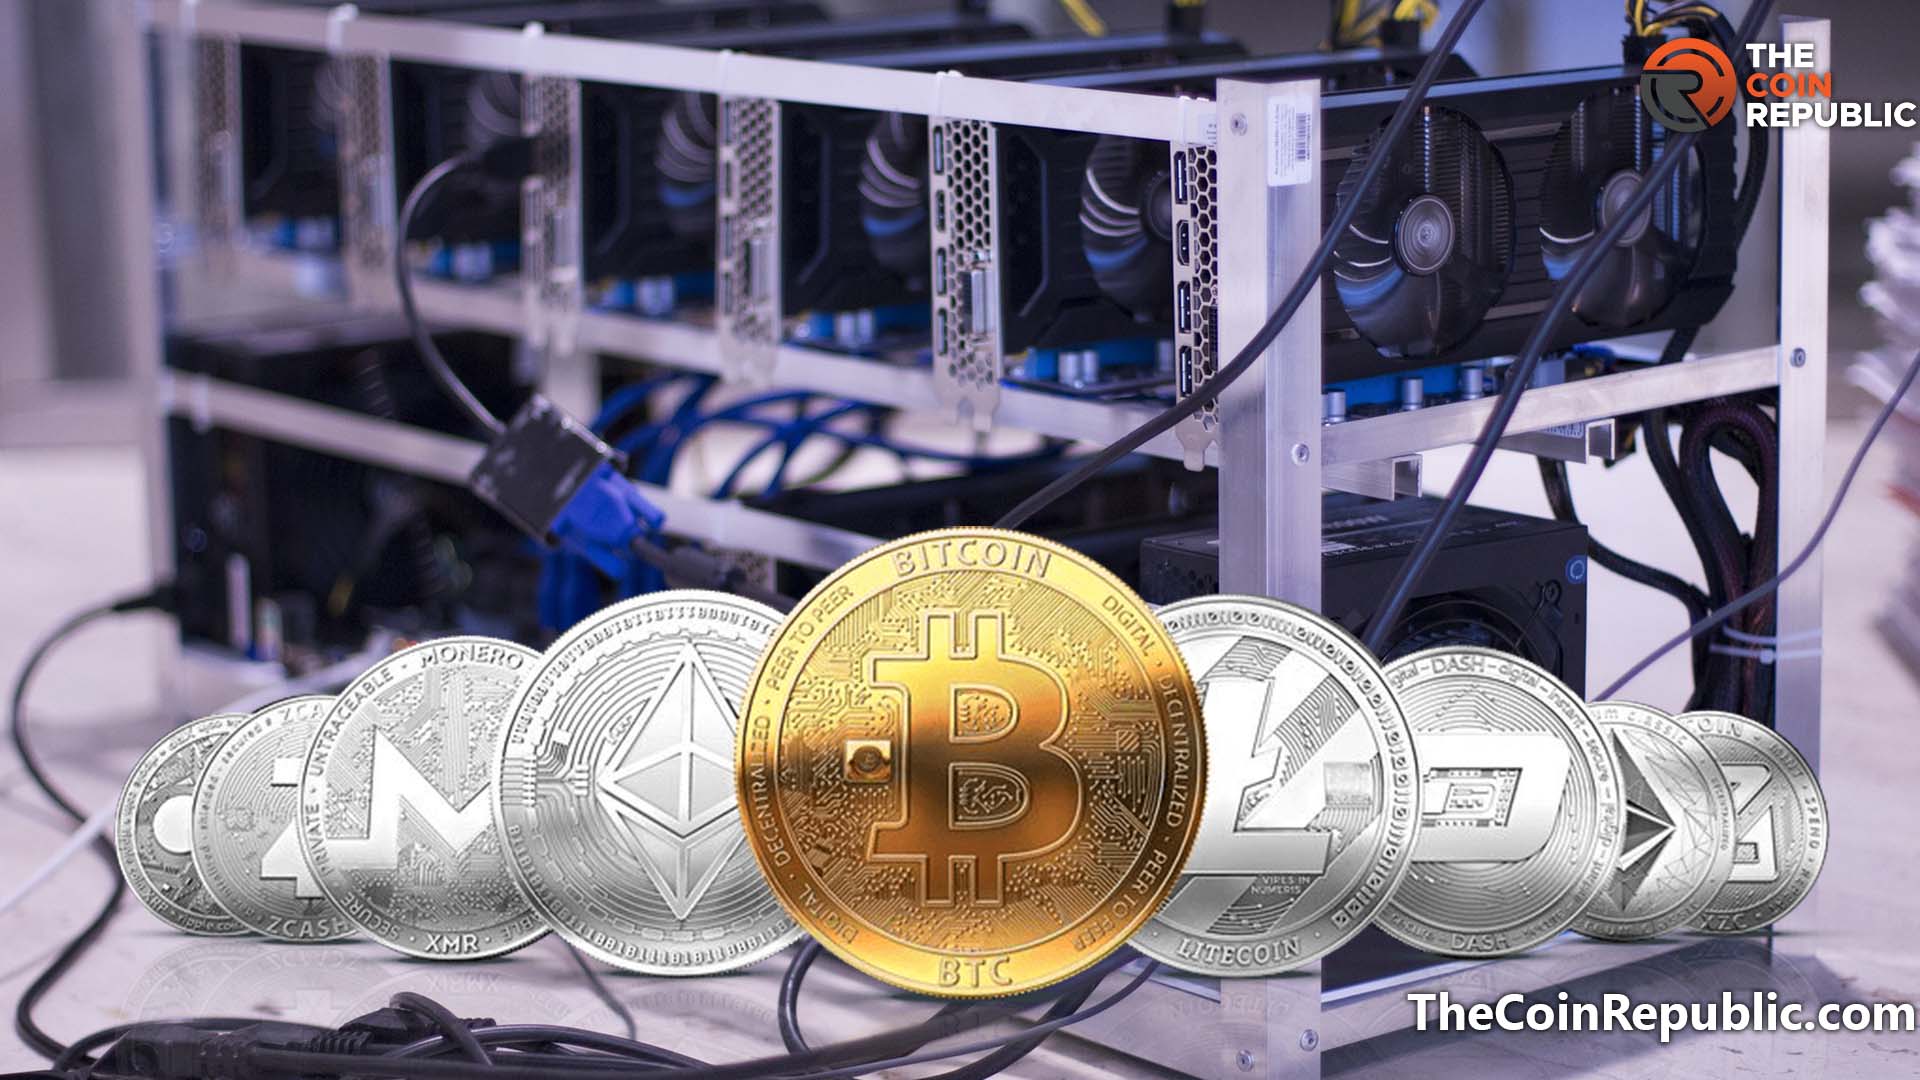 New York State to put Ban on Crypto Mining